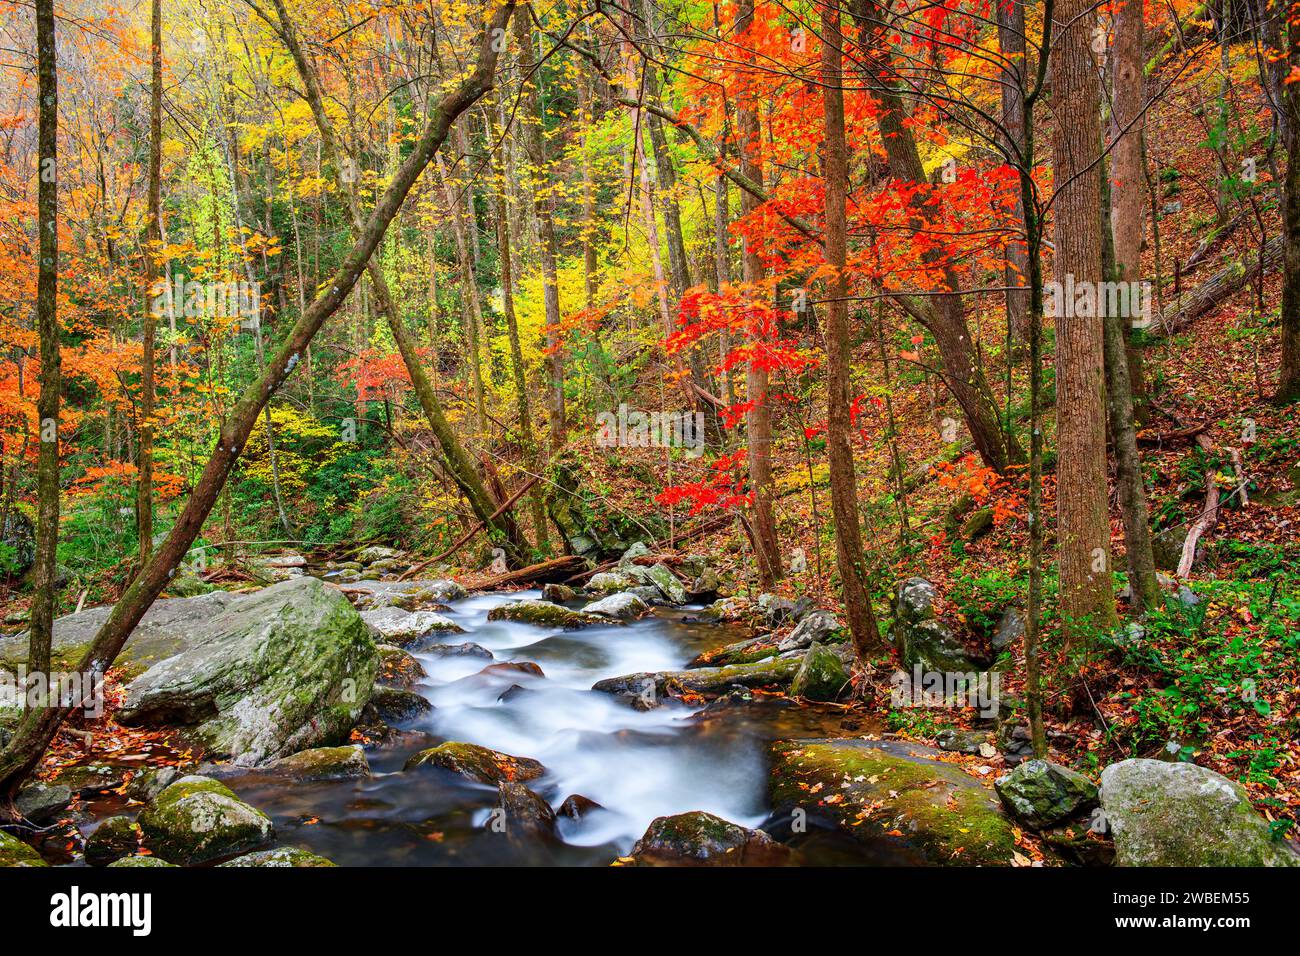 Smith Creek flowing from Anna Ruby Falls, Georgia, USA in autumn. Stock Photo